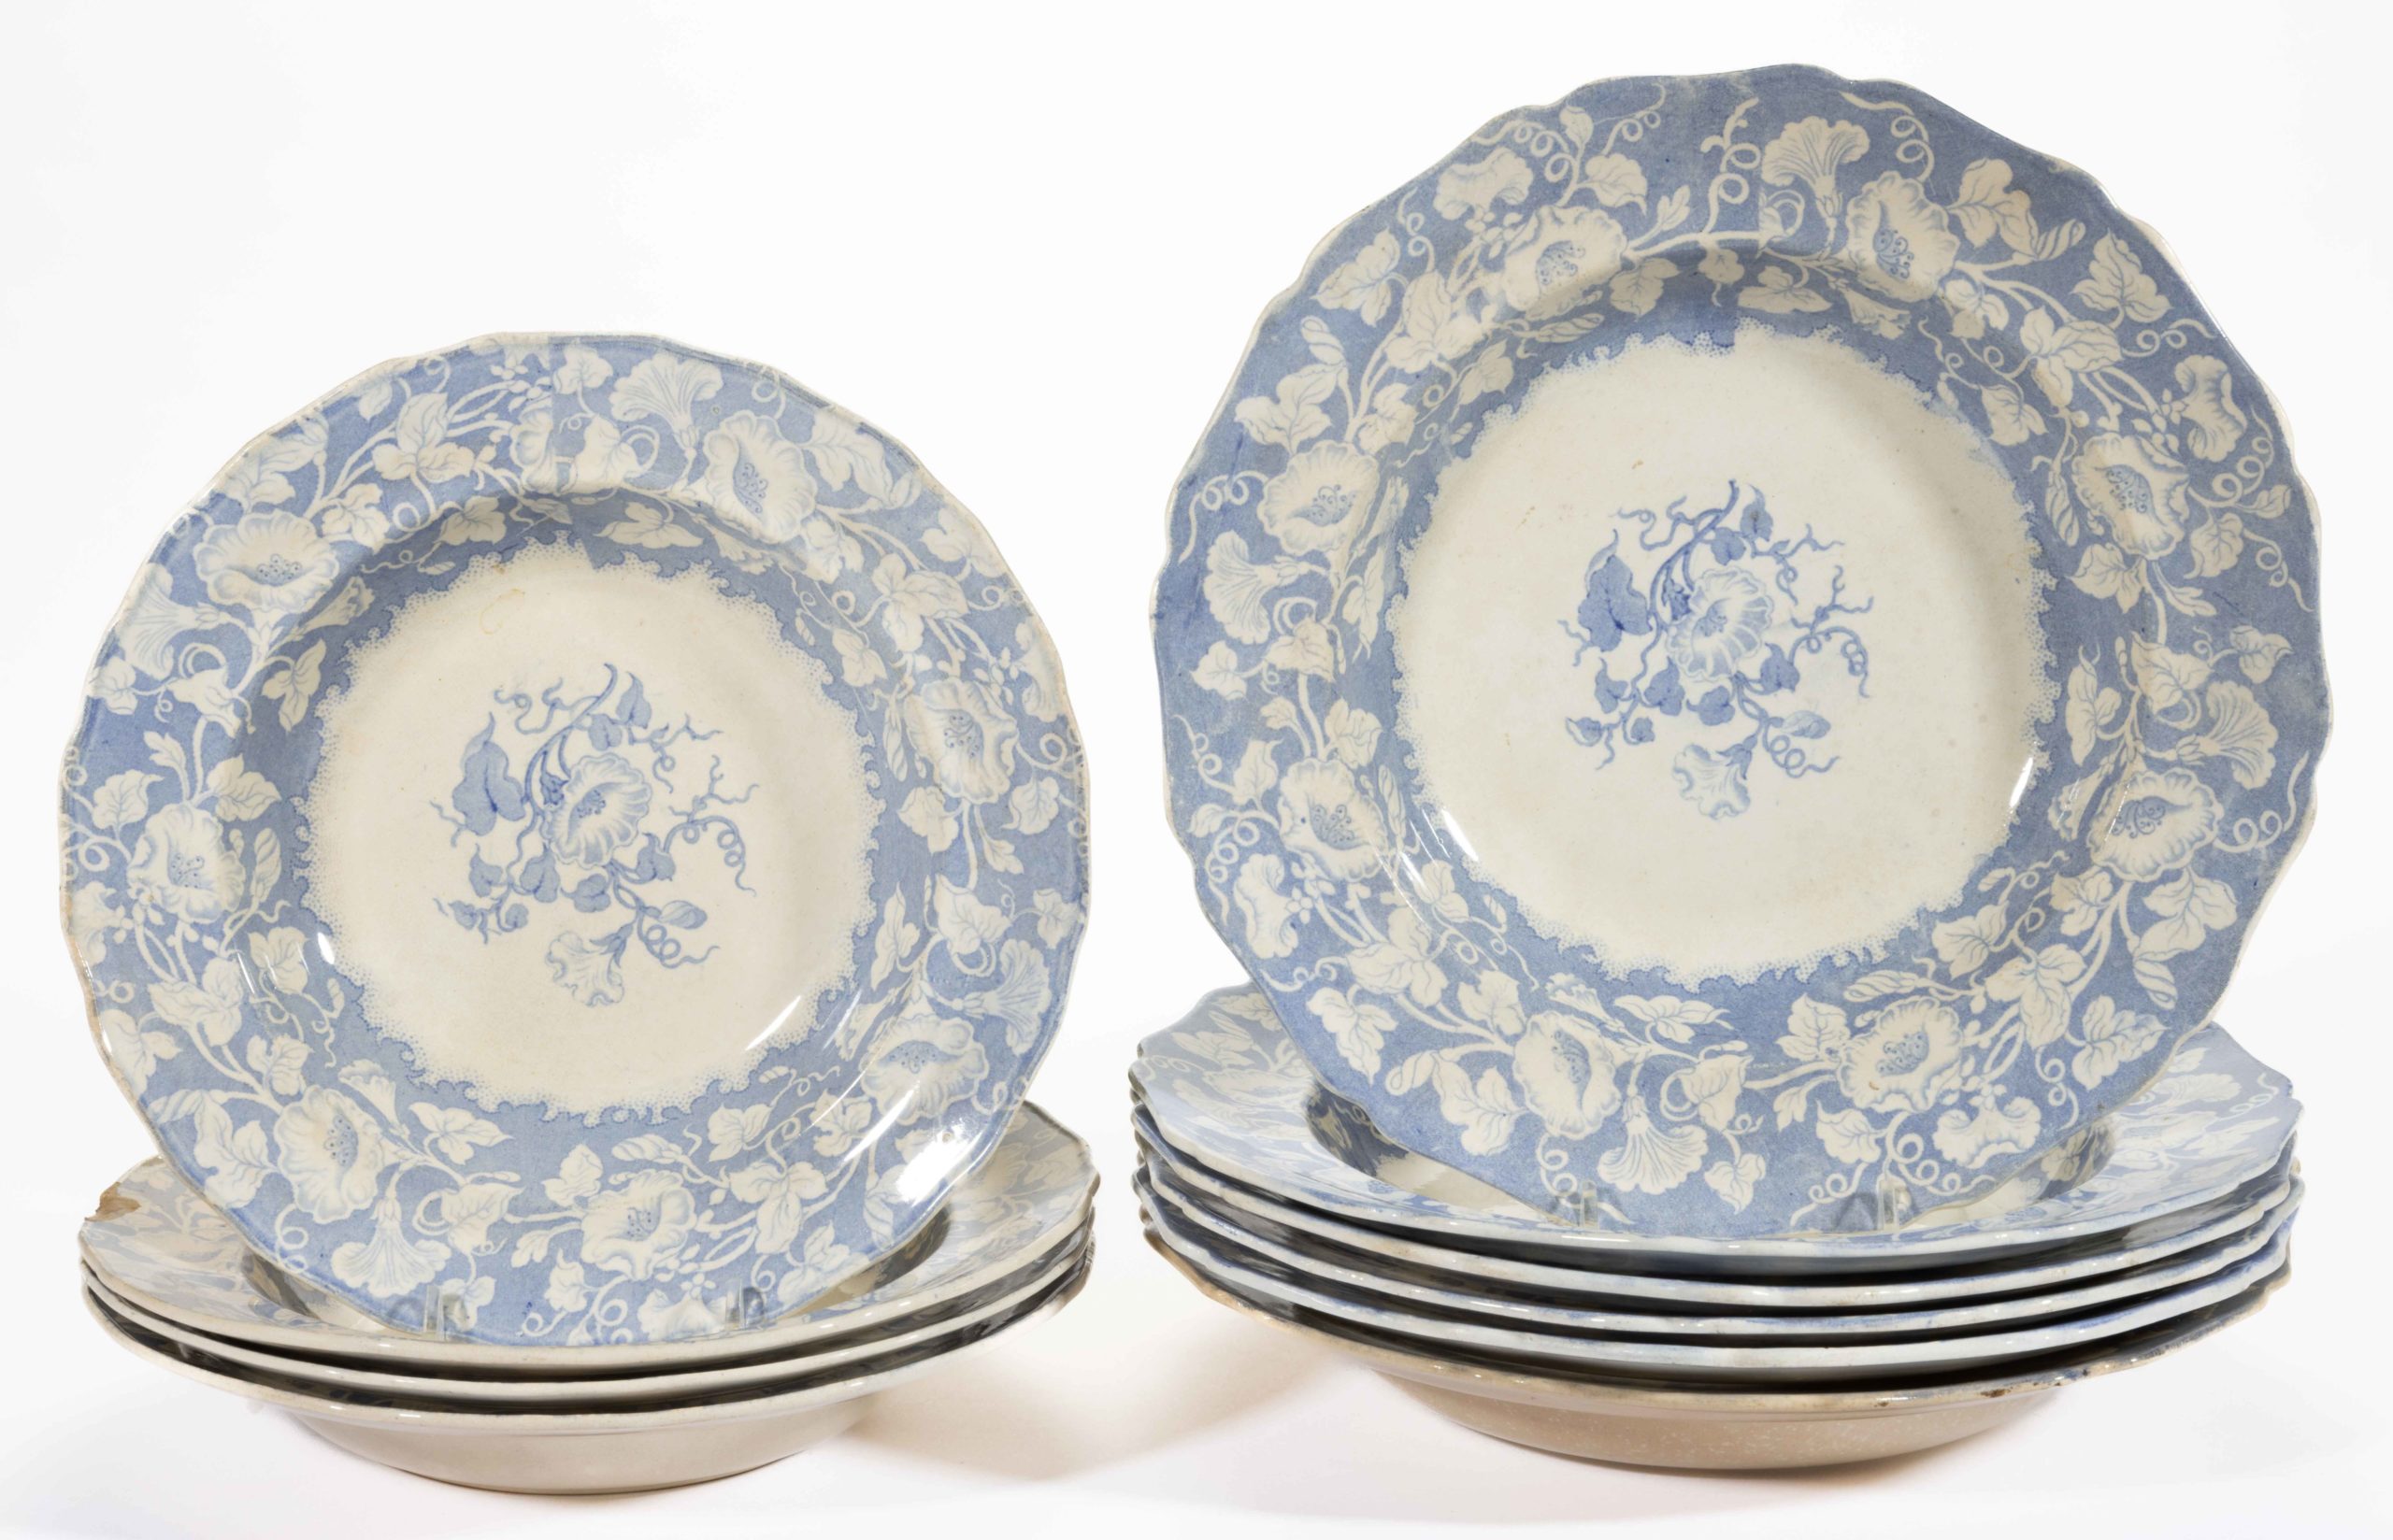 ENGLISH STAFFORDSHIRE TRANSFER-PRINTED FLORAL MOTIF SOUP PLATES, SET OF TEN,